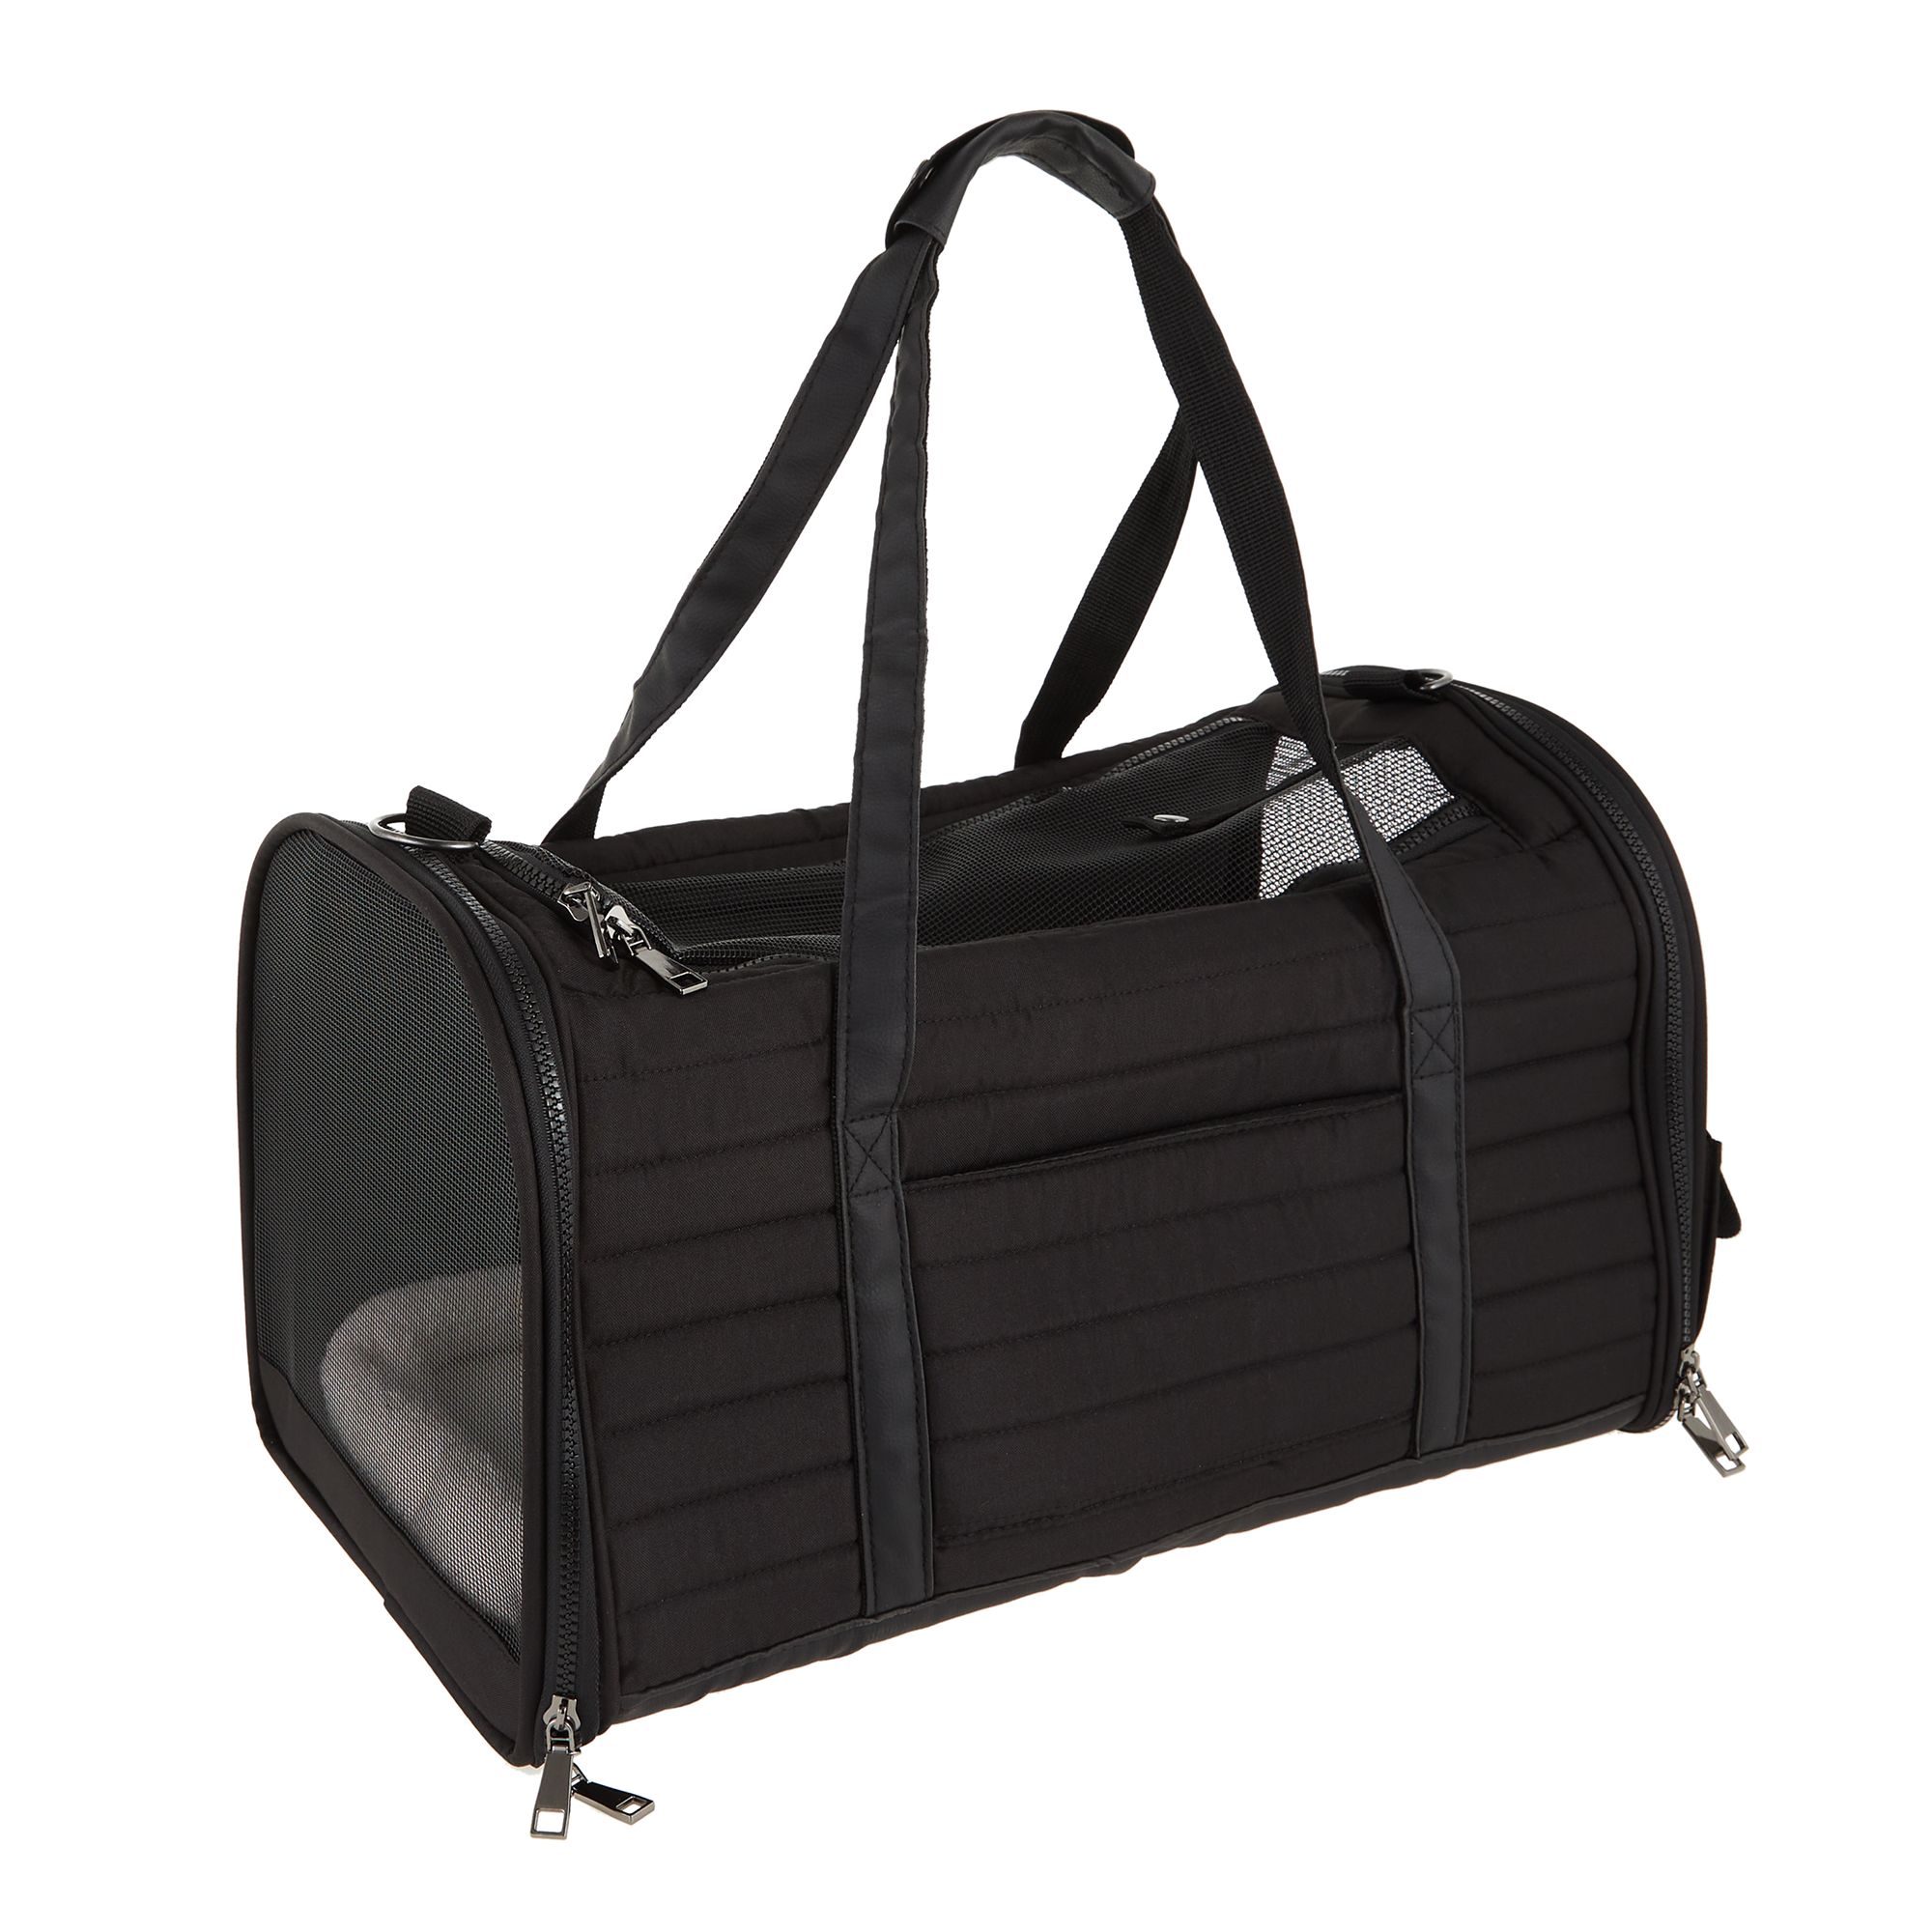 Top Paw Travel Airline Carrier